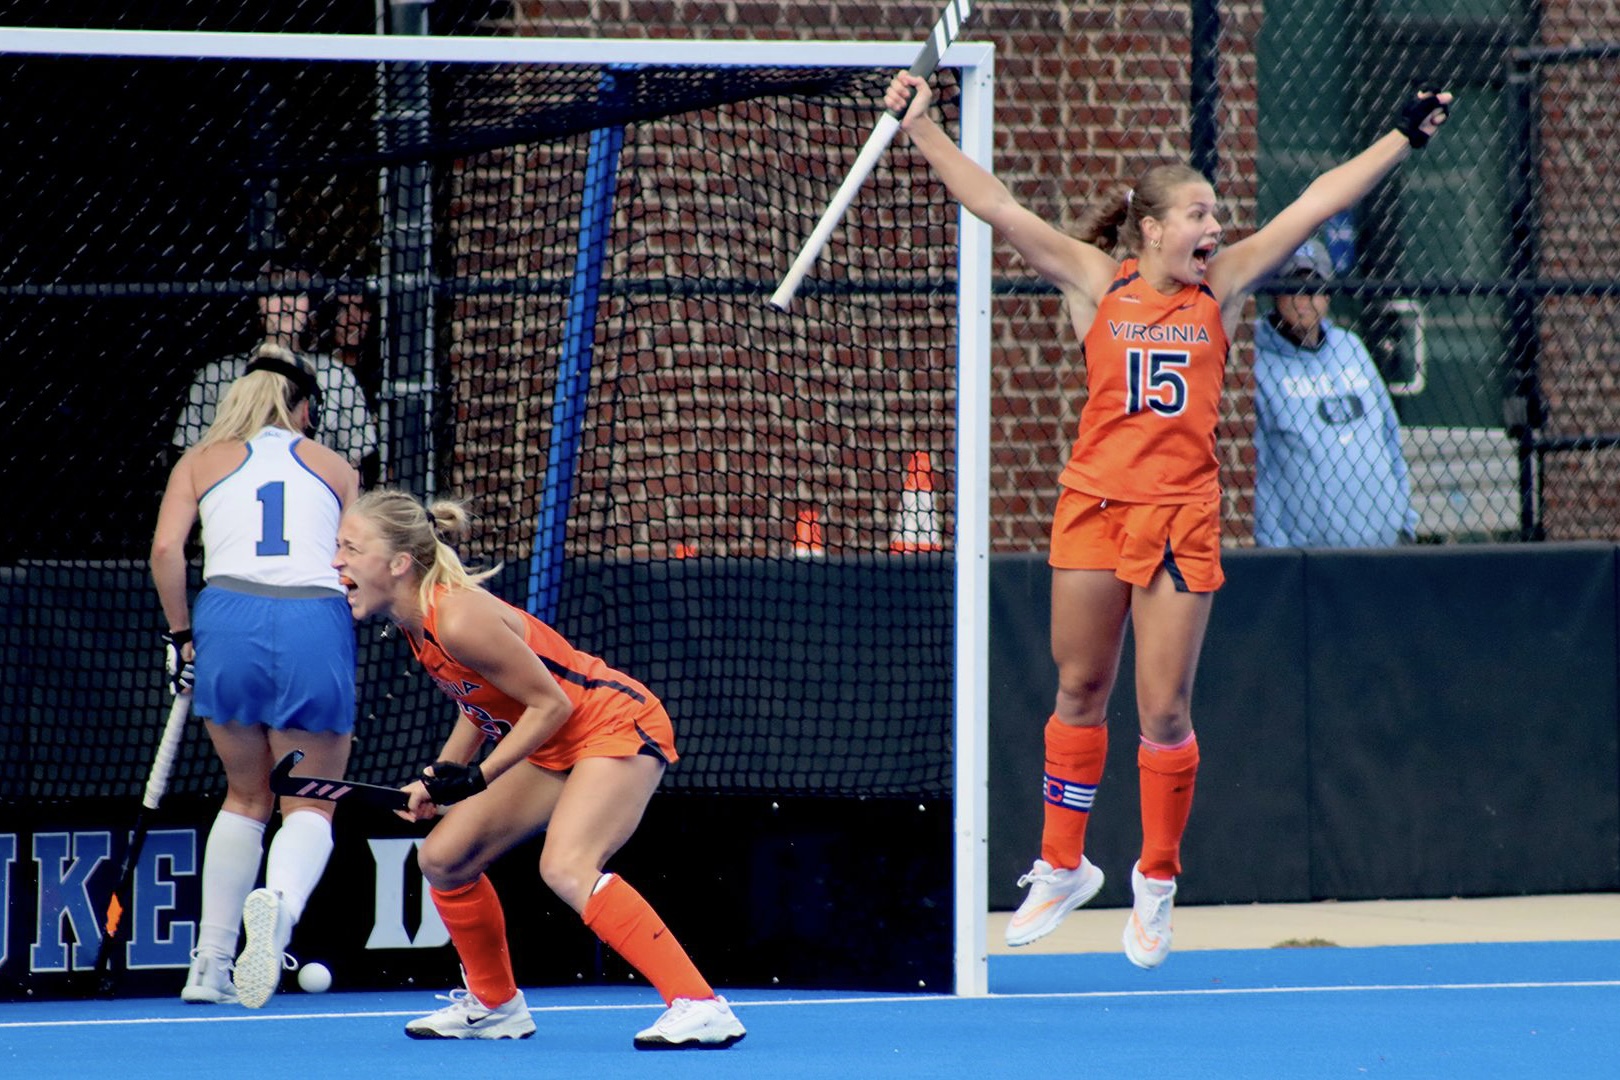 Field Hockey Goalie - Part 4: Aerial saves to the Right (Stick saves) 